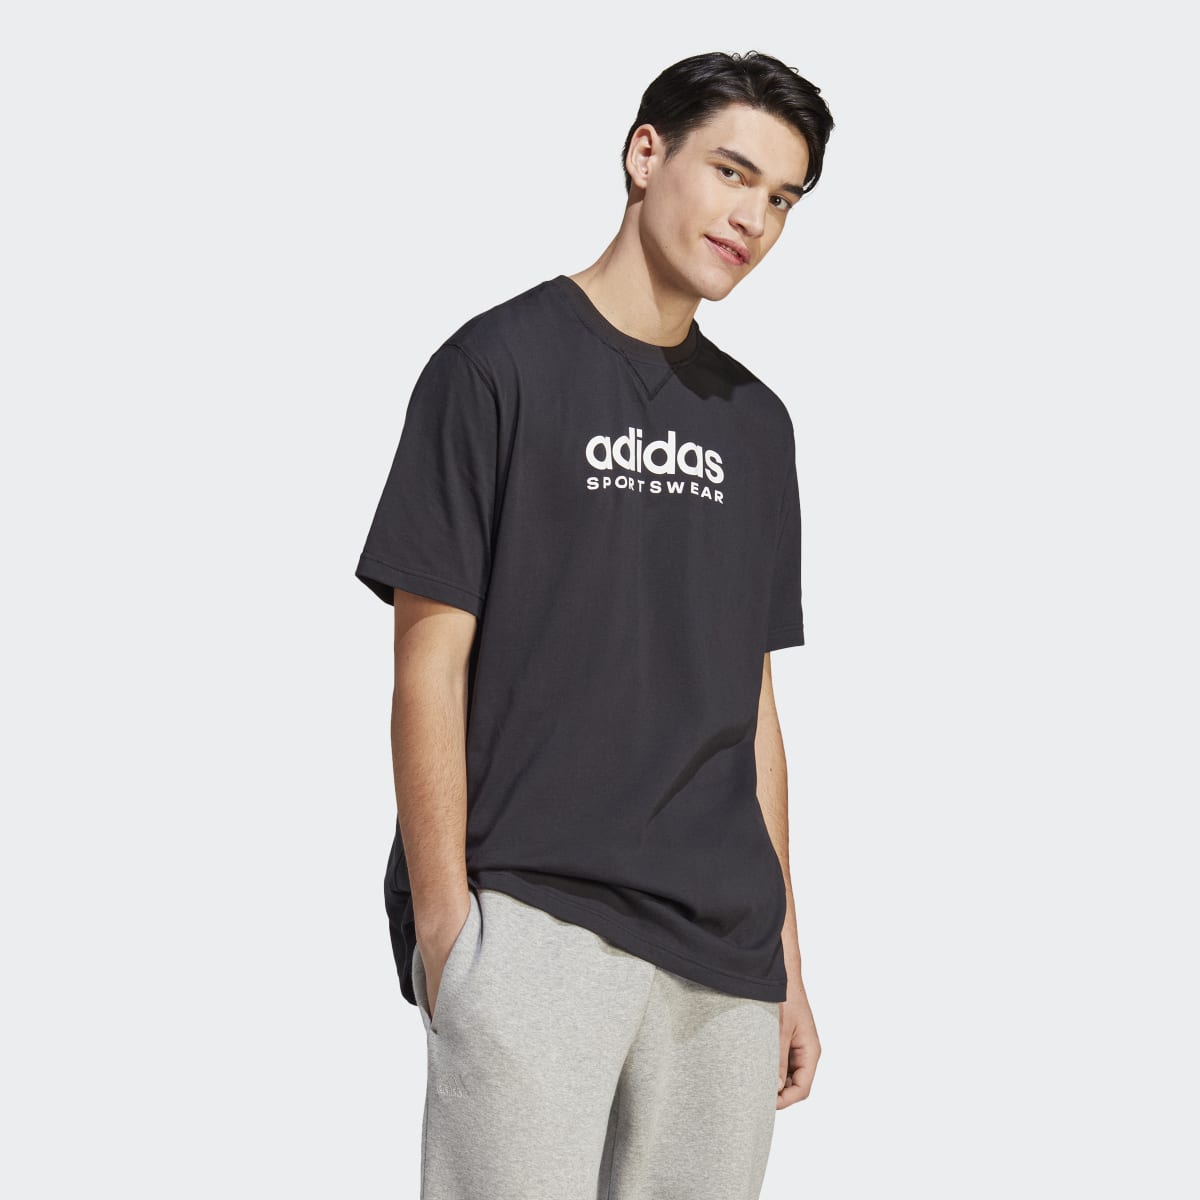 PriceGrabber - All SZN Graphic Tee | Adidas | $55